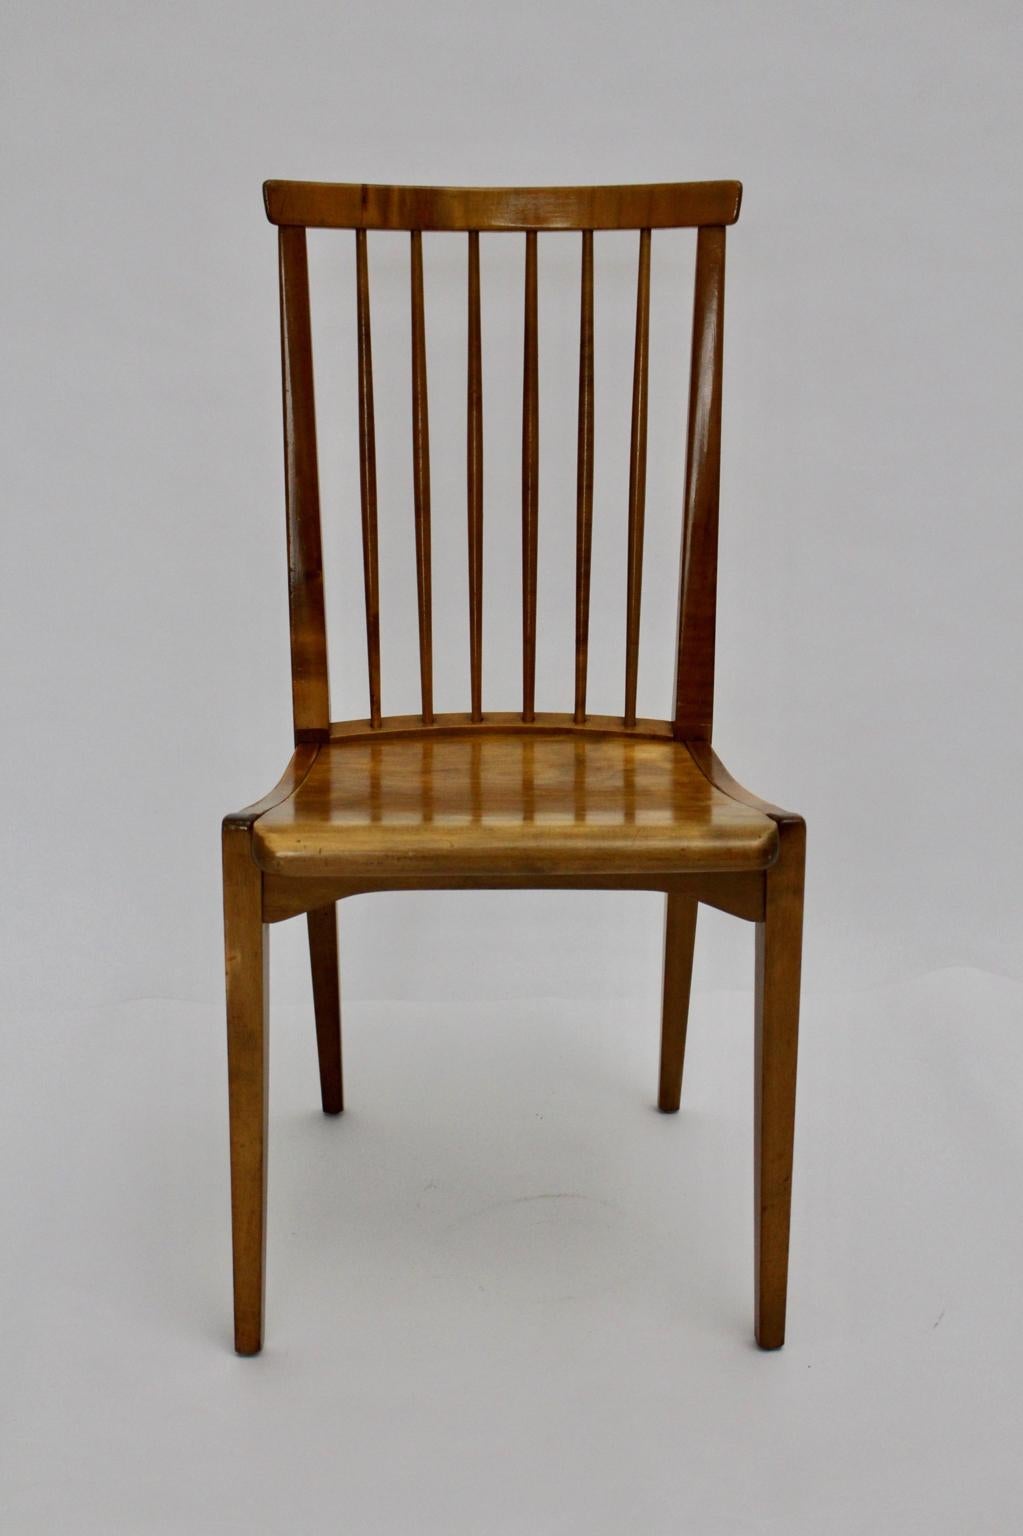 Brown Mid Century Modern chair or side chair designed by Otto Niedermoser and executed by Thonet Austria, circa 1950.
The paper label with the business lettering Thonet is labeled underneath
Also the chair was made of honey colored solid maple tree,